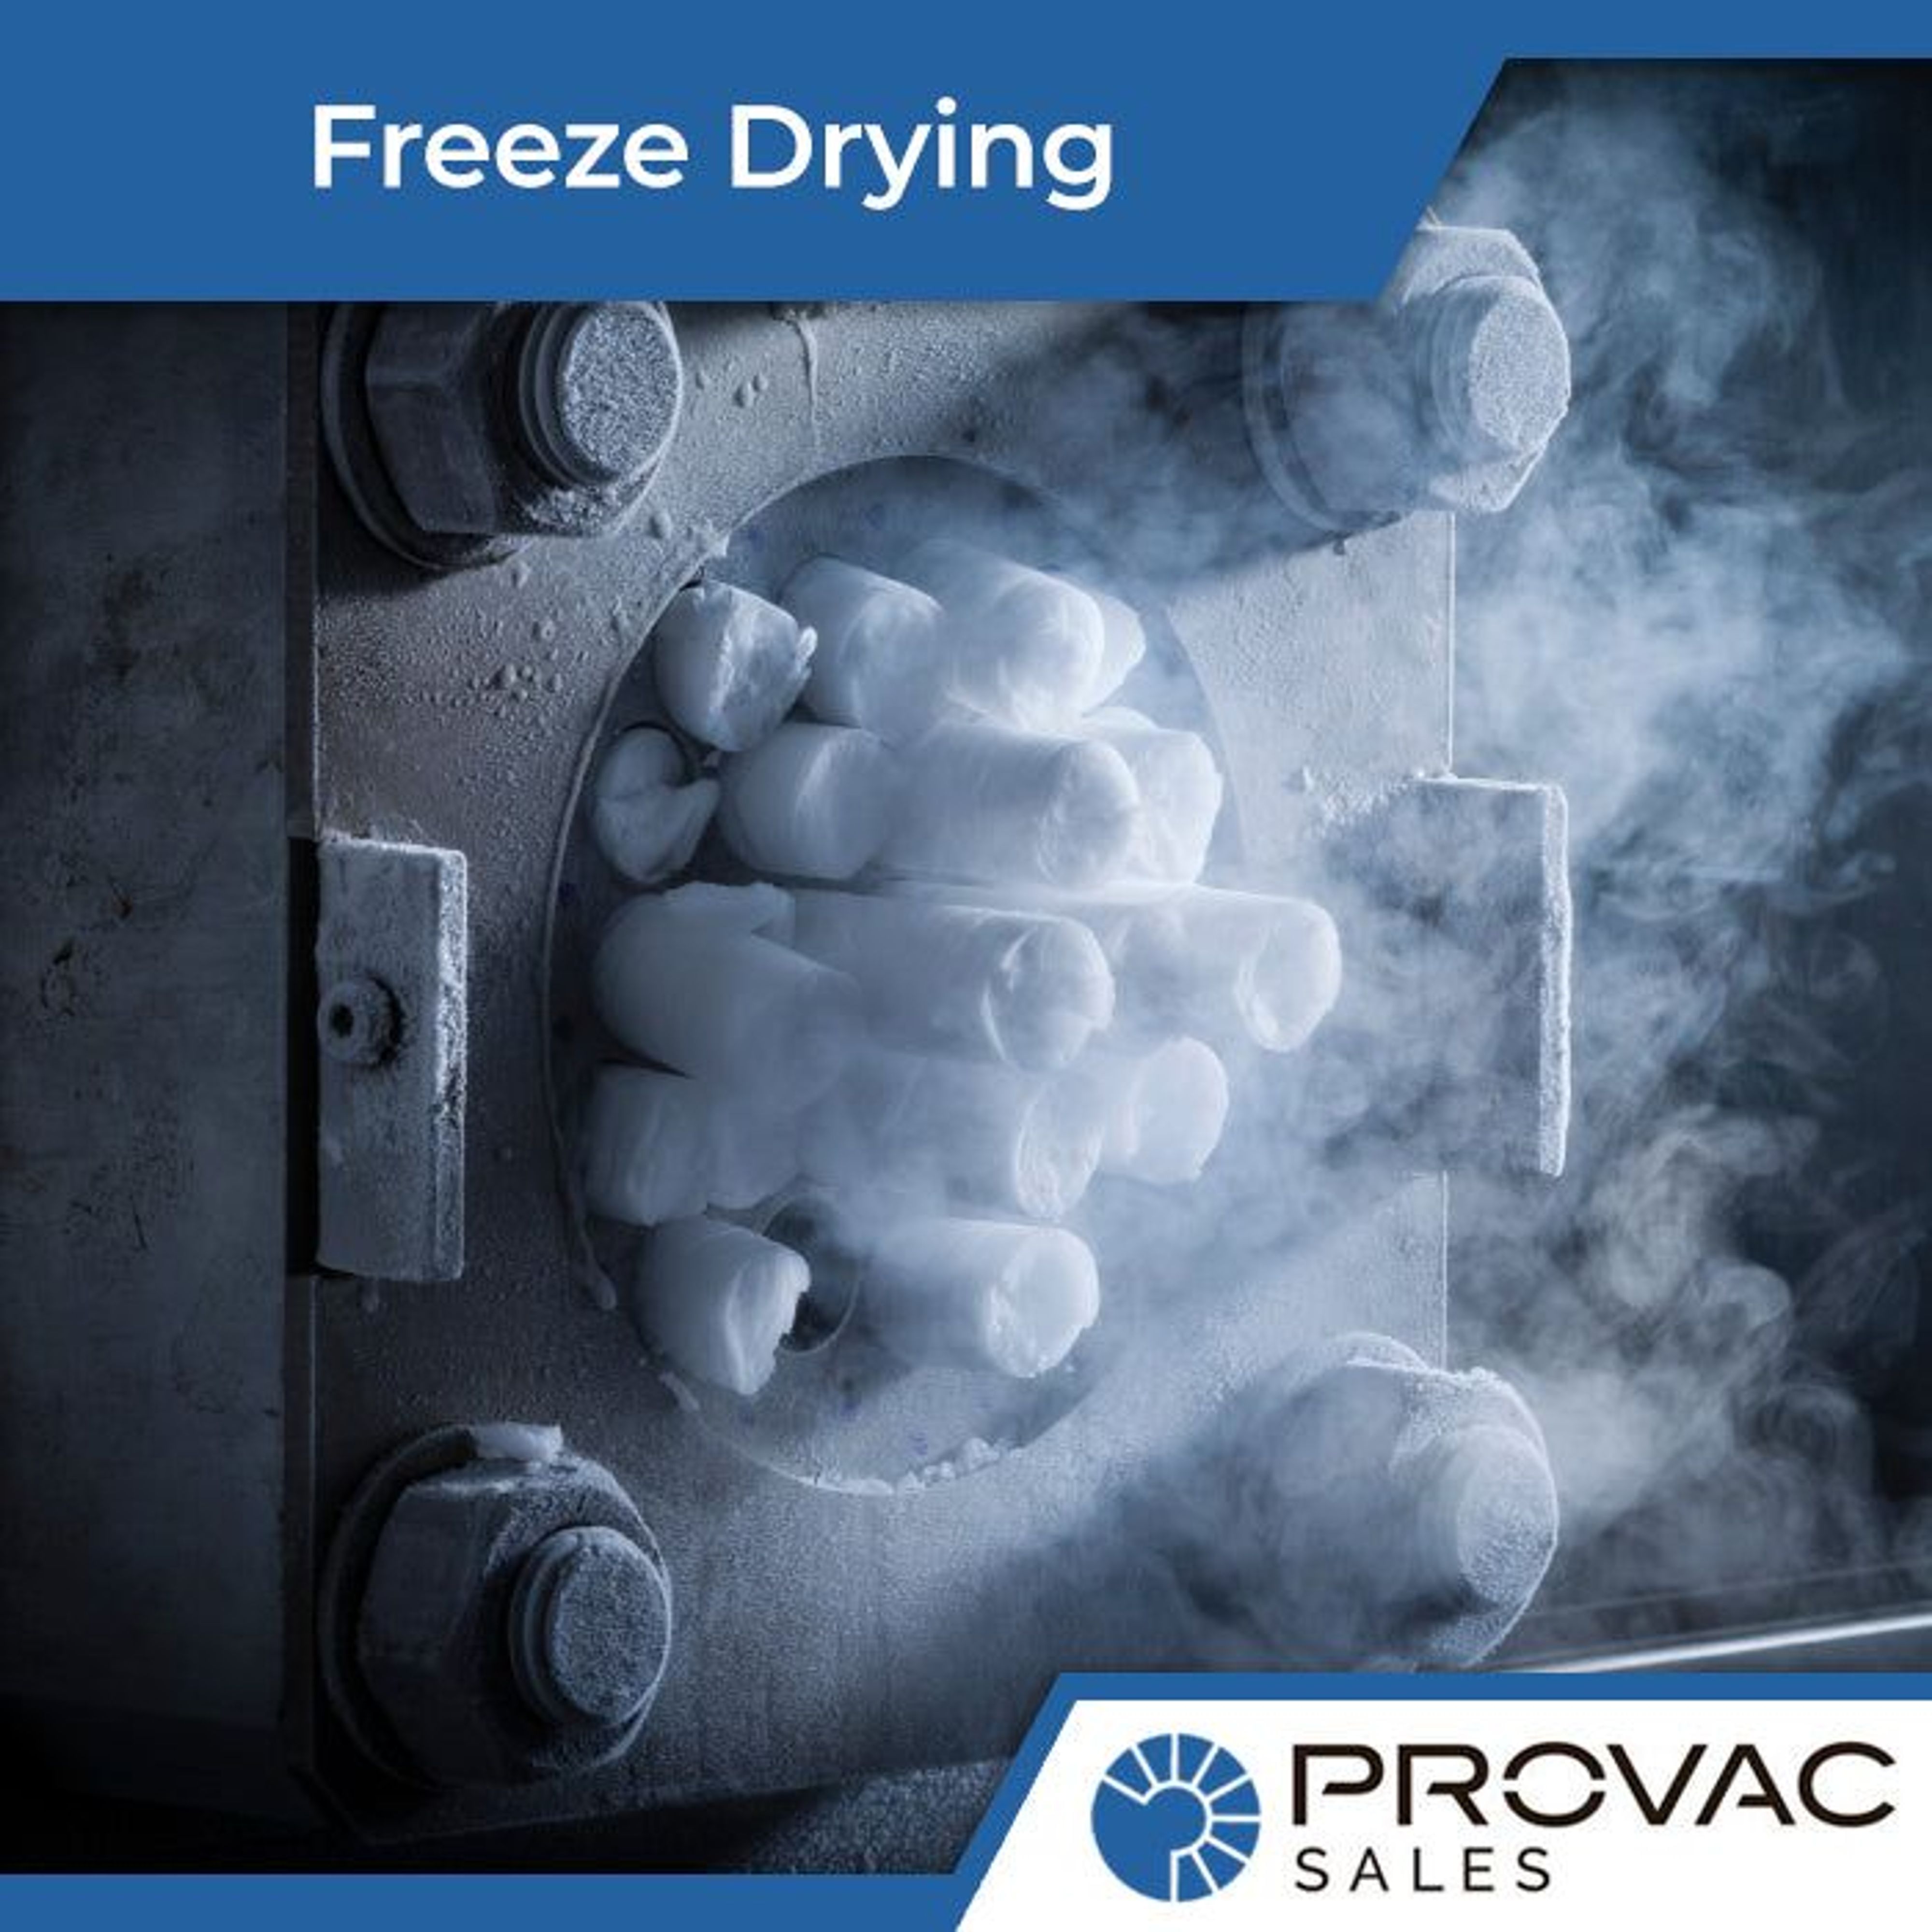 The Process of Freeze Drying Under Vacuum Background